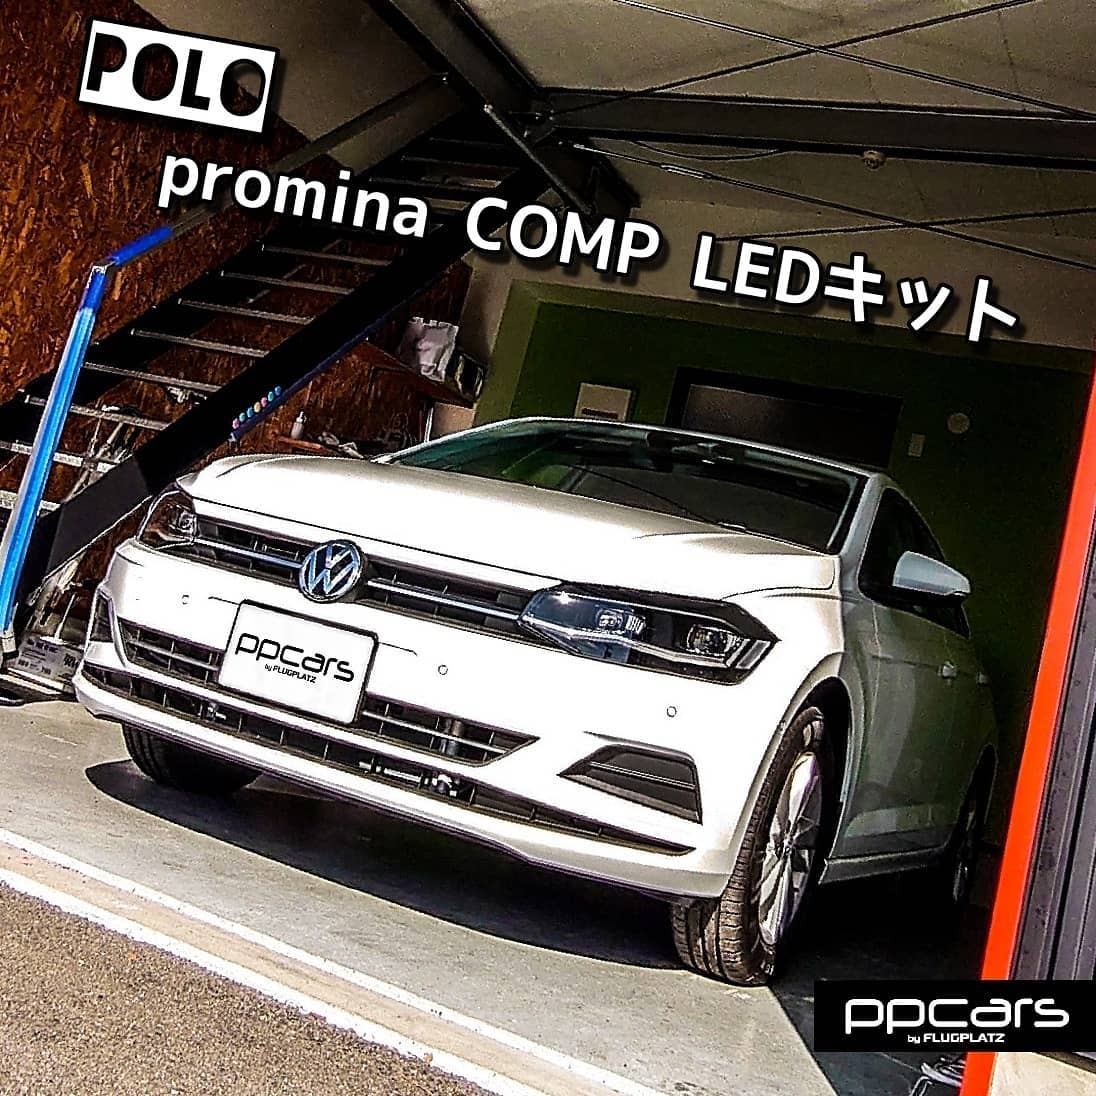 Polo (AW1) x promina COMP LEDキット | 事例紹介 | VW | AUDI | 西宮 